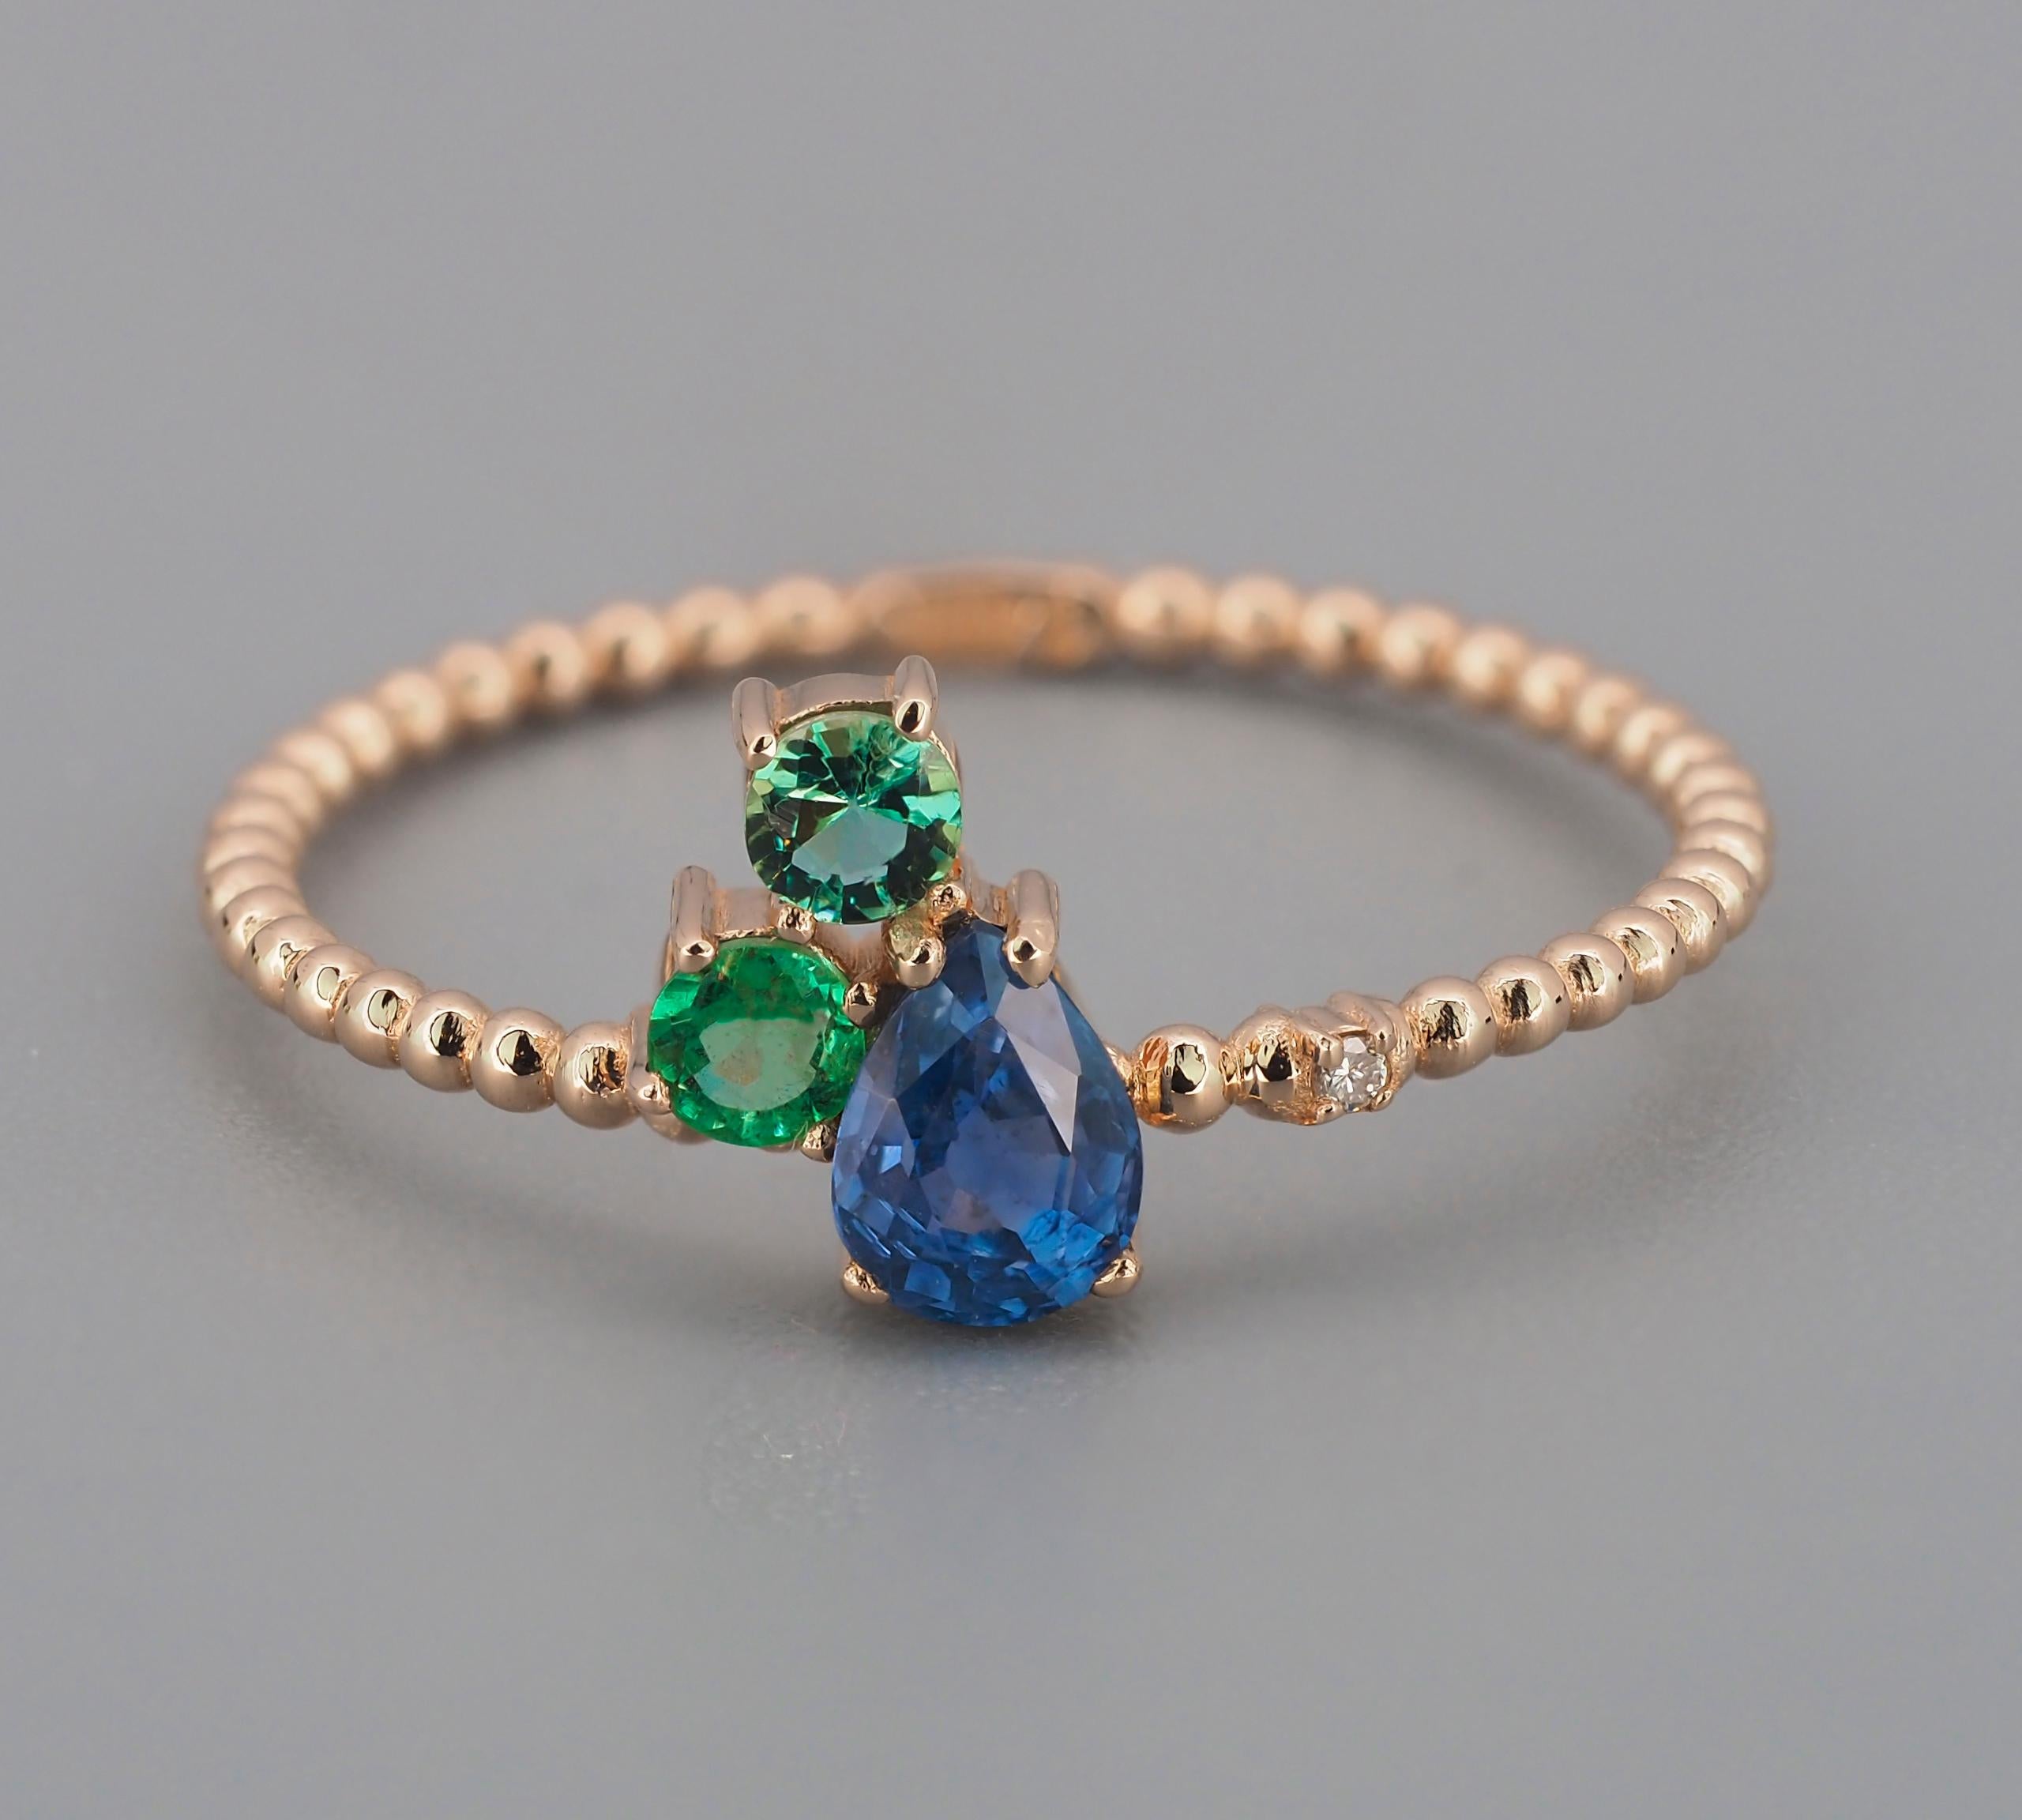 Pear sapphire ring. 
Blue sapphire gold ring. 14k gold ring with genuine Sapphire. Minimalist sapphire ring. Sapphire engagement ring.

Weight: 1.3 g. depends from size.
Gold - 14k gold

Central stone: Sapphire
Cut: pear
Weight: aprx 0.6 ct.
Color: